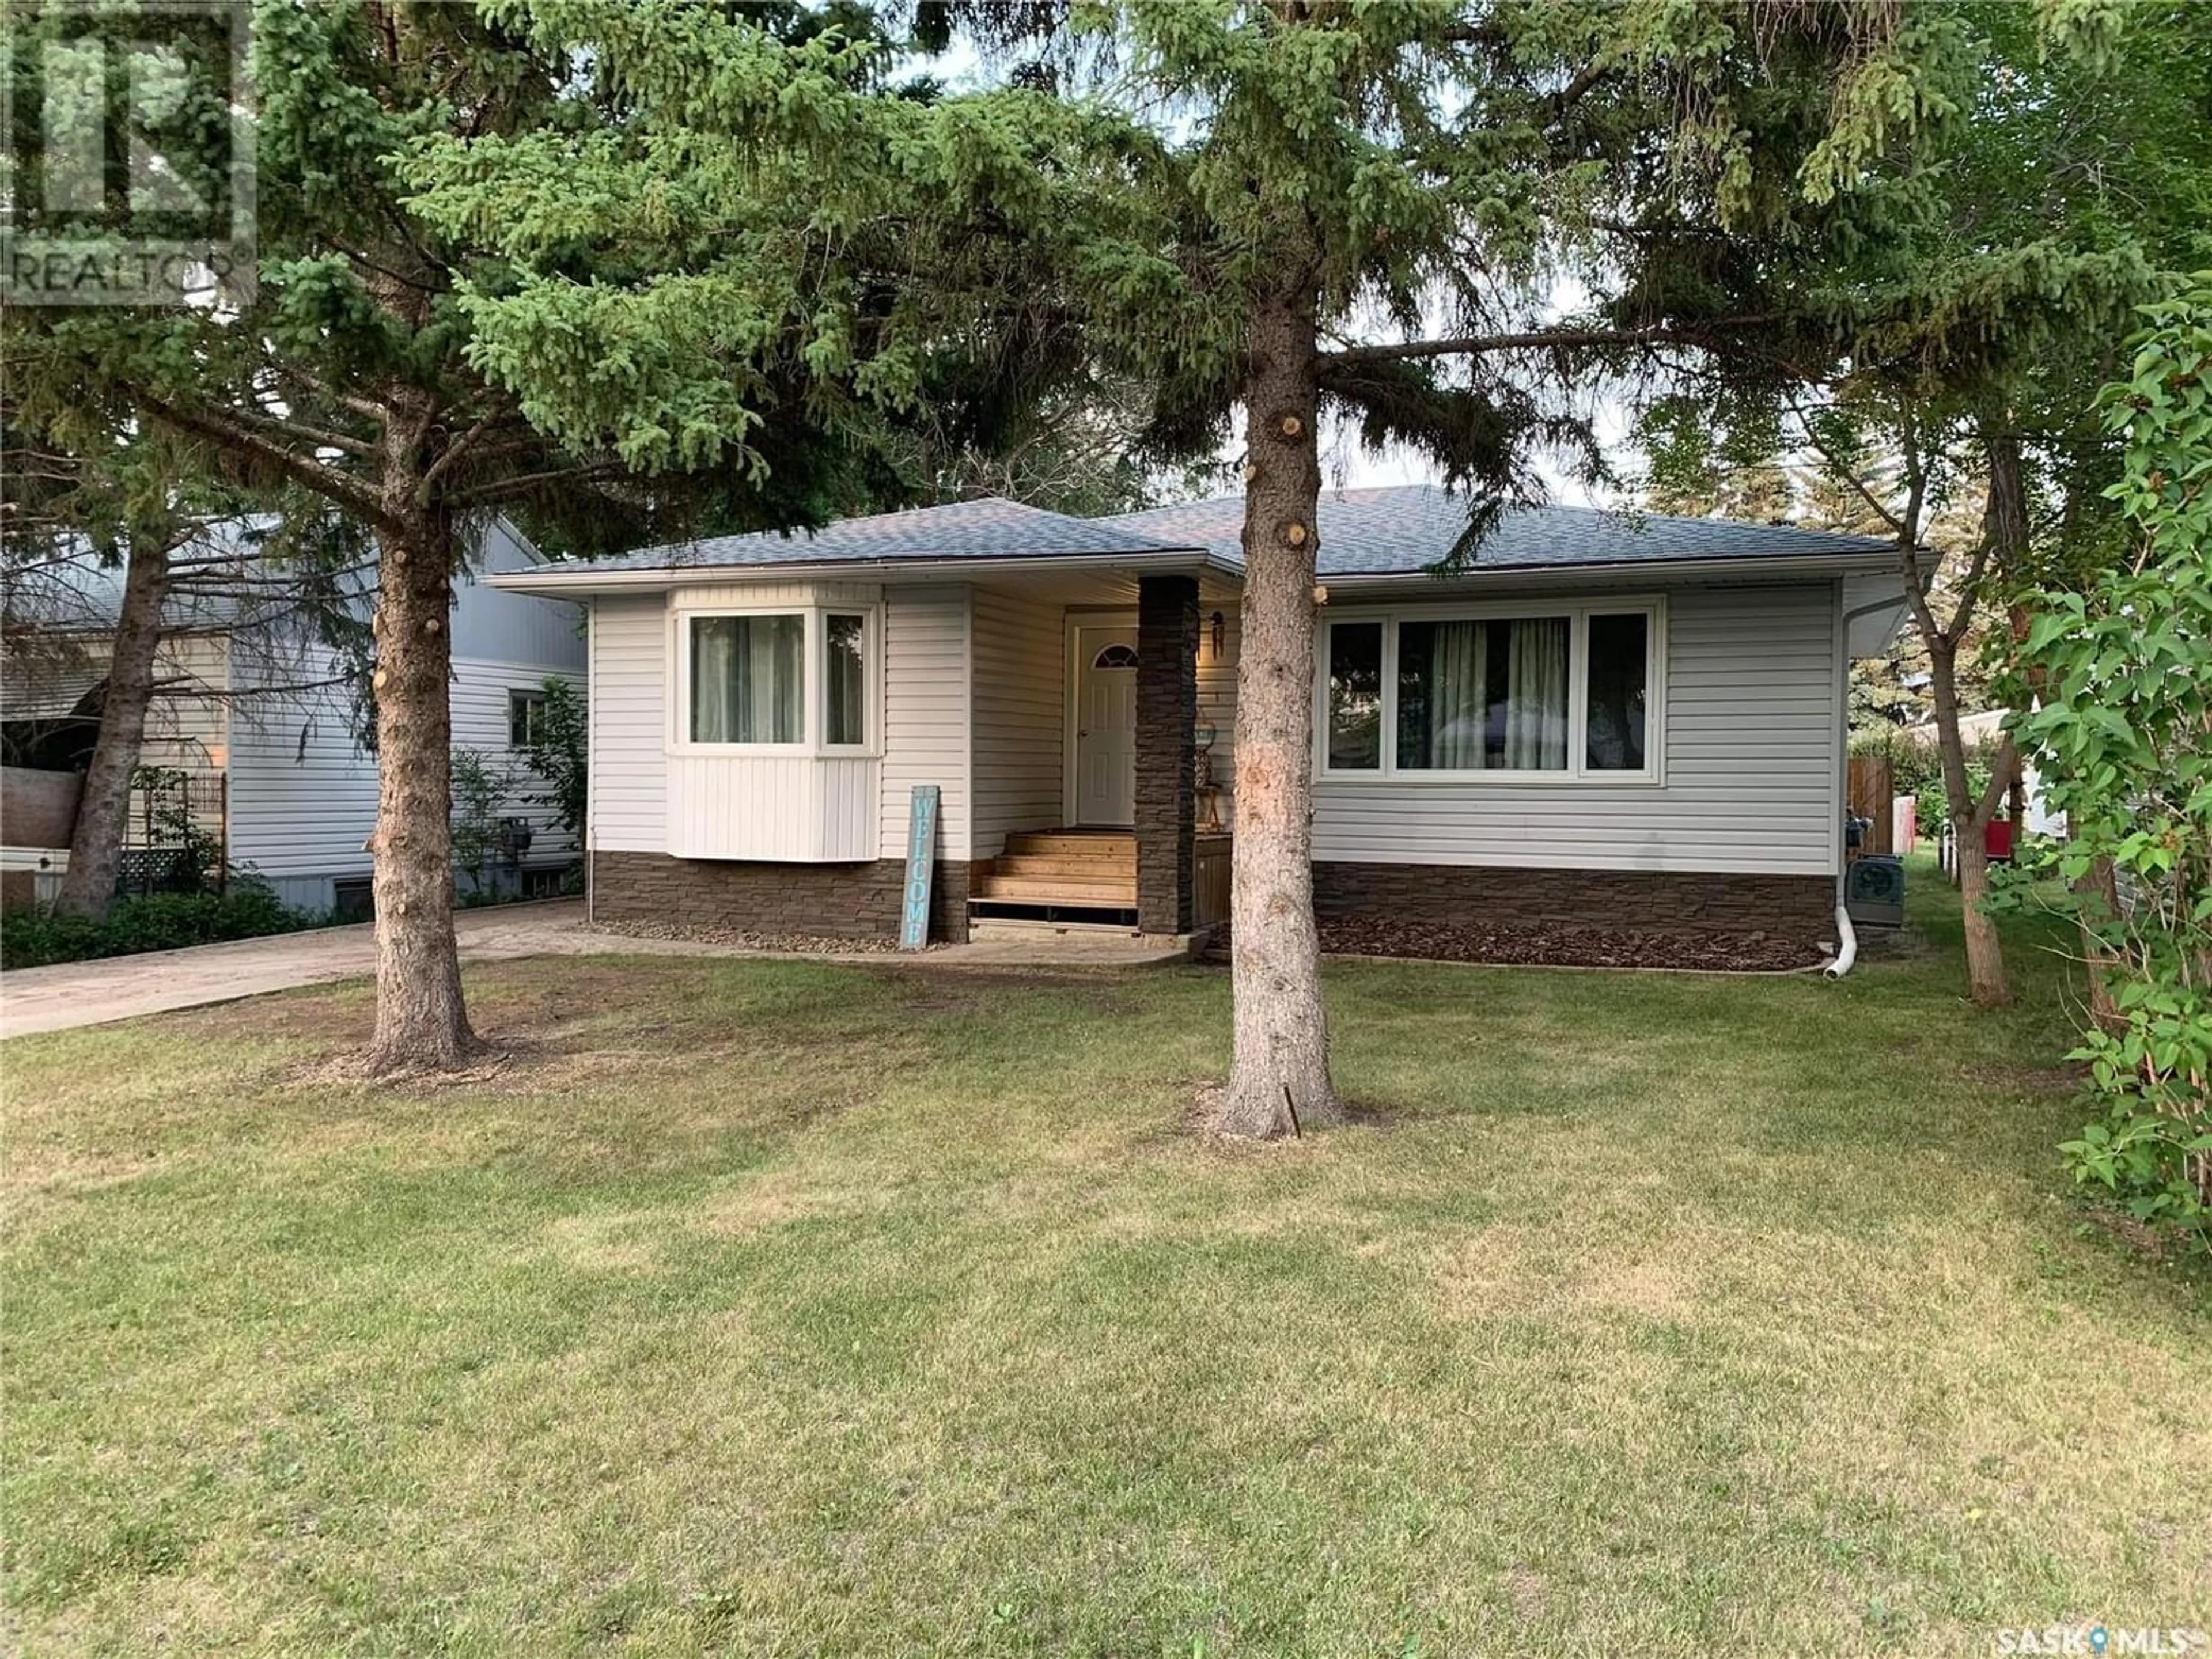 Frontside or backside of a home for 913 Pacific STREET, Grenfell Saskatchewan S0G2B0